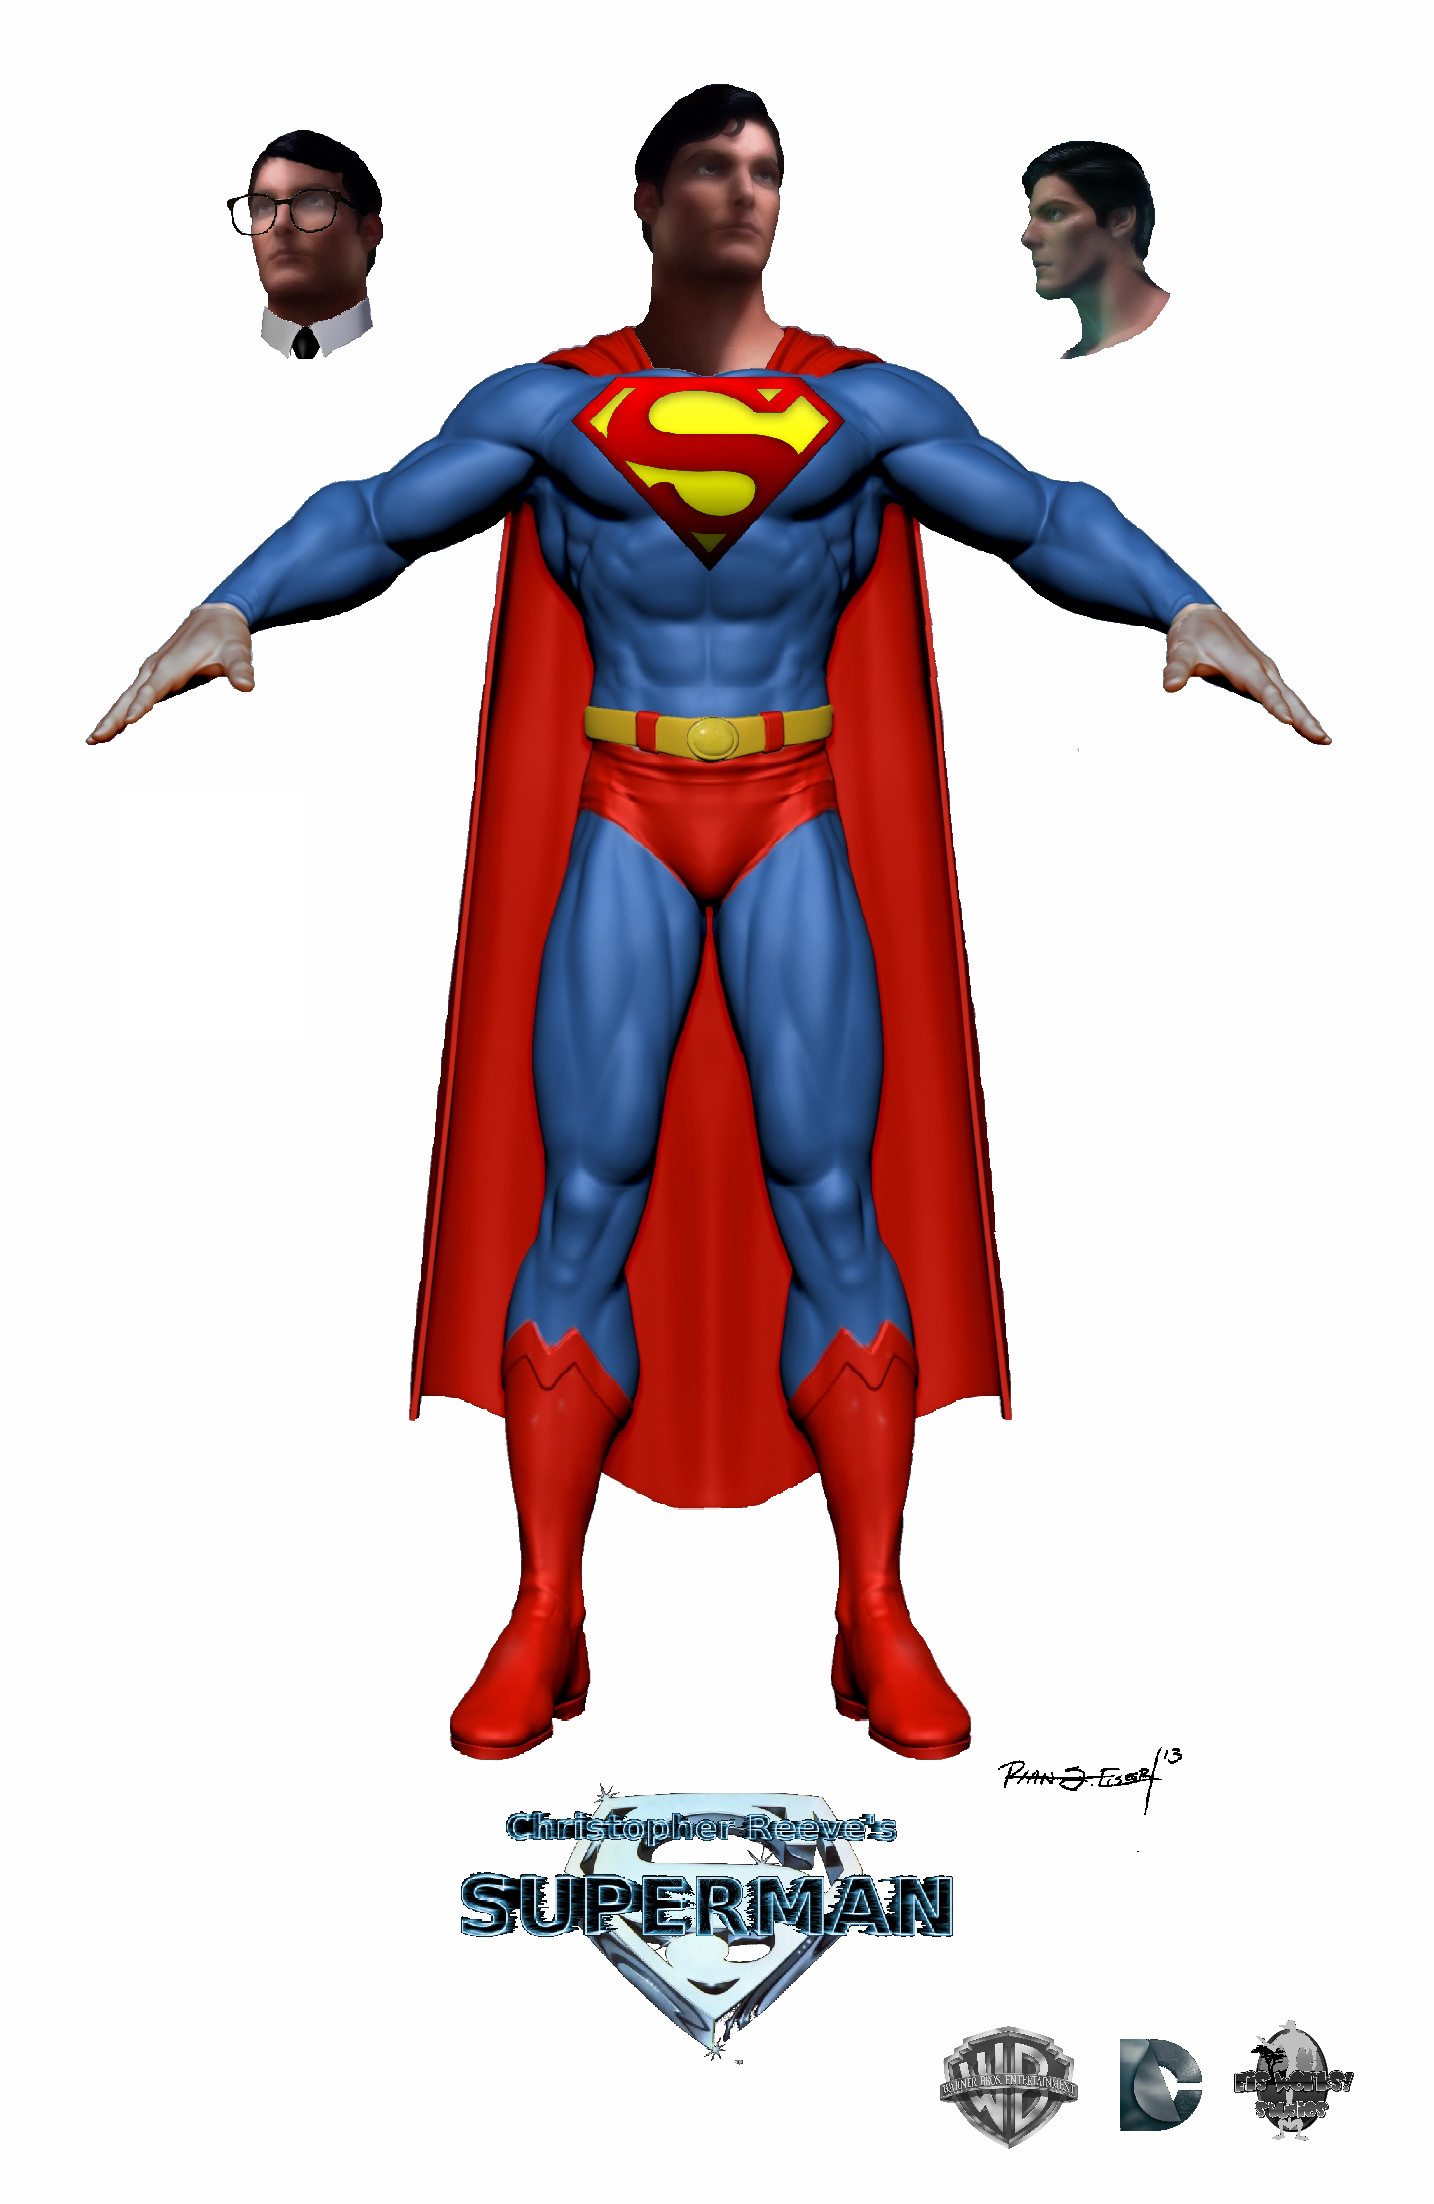 1434x2204 Christopher Reeve's Superman by EisWorks Christopher Reeve's Superman by  EisWorks